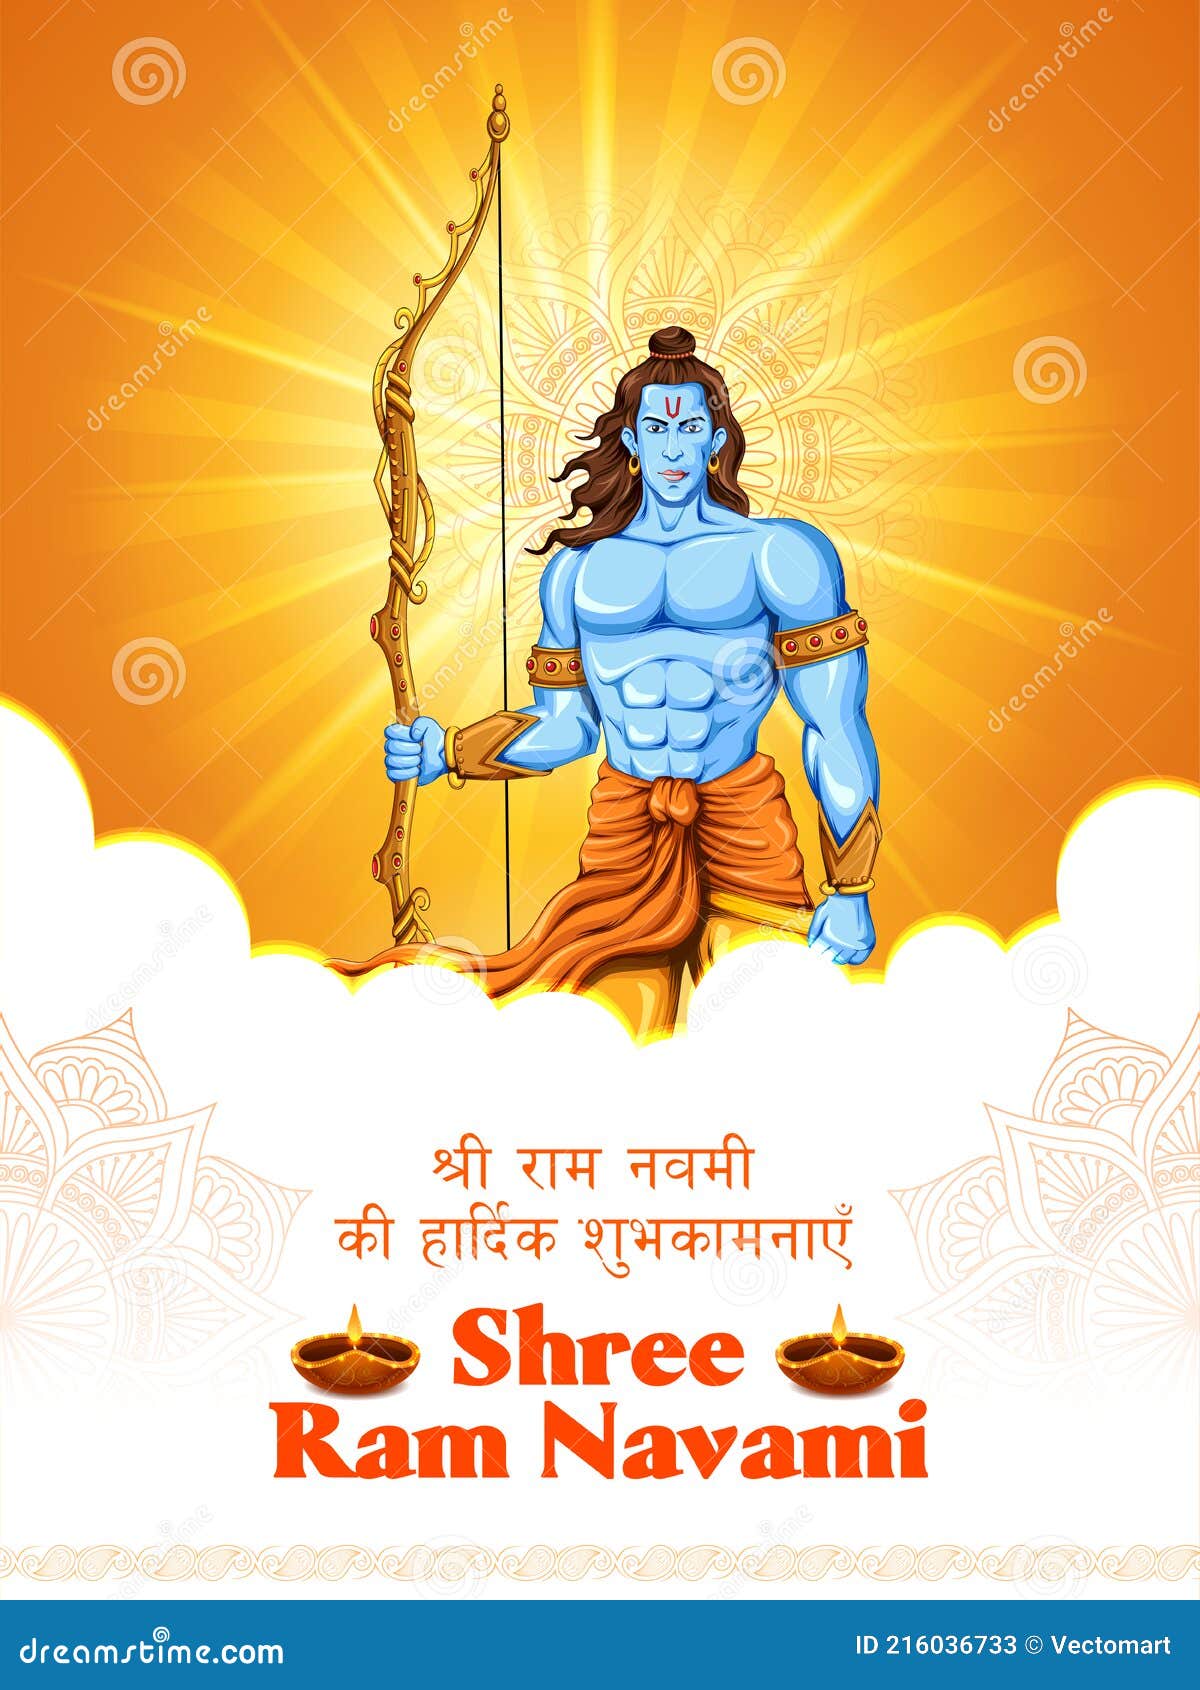 Lord Rama with Bow Arrow with Hindi Text Meaning Shree Ram Navami  Celebration Background for Religious Holiday of India Stock Vector -  Illustration of navmi, tradition: 216036733